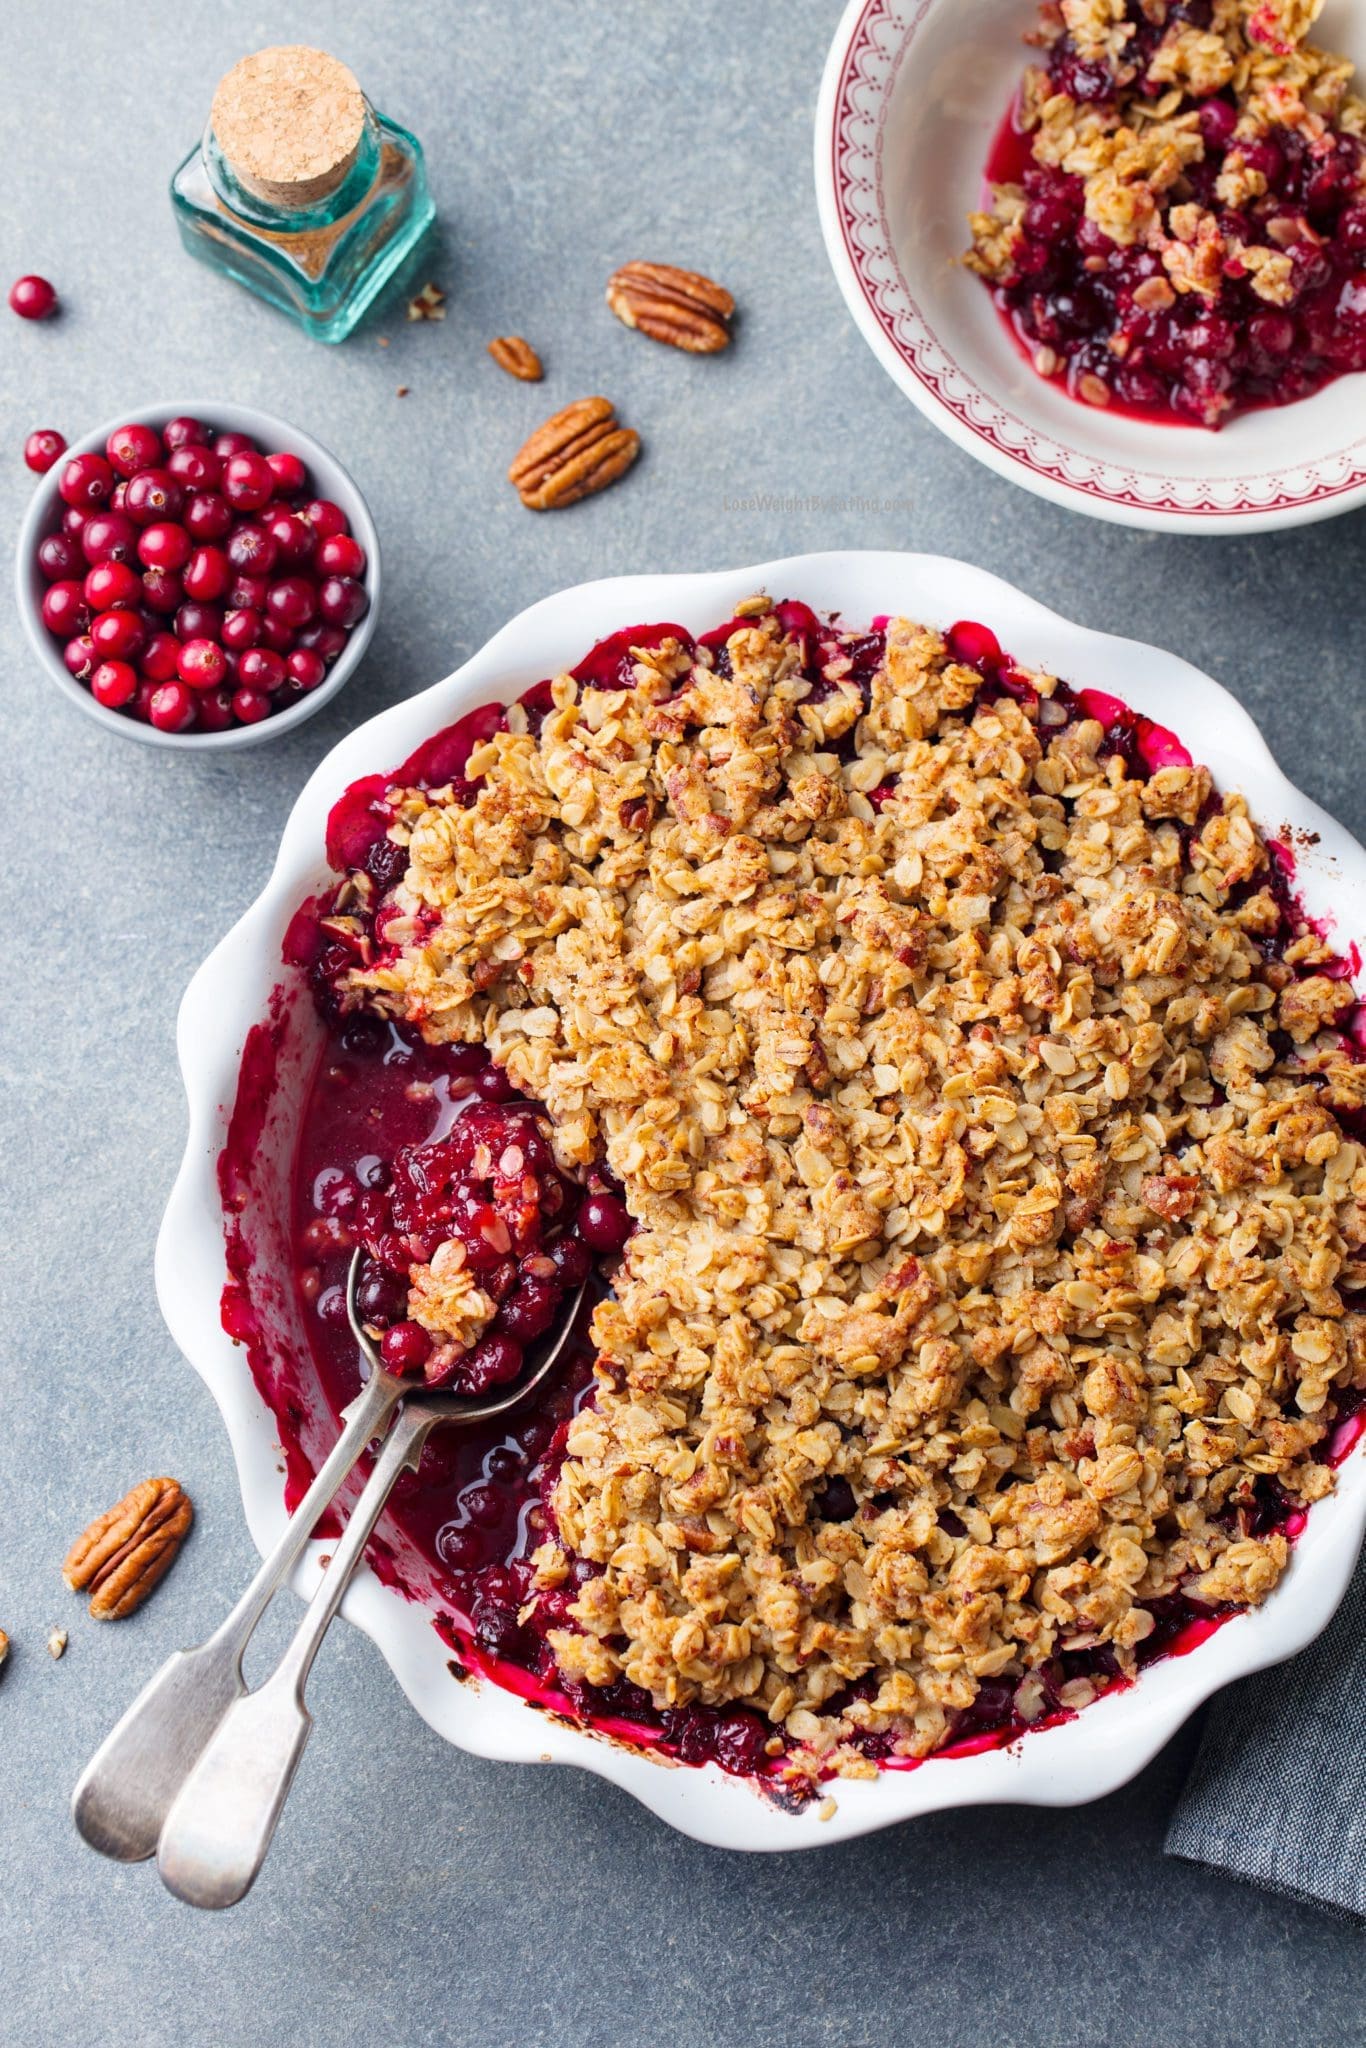 Low Calorie Cranberry Crisp - Lose Weight By Eating